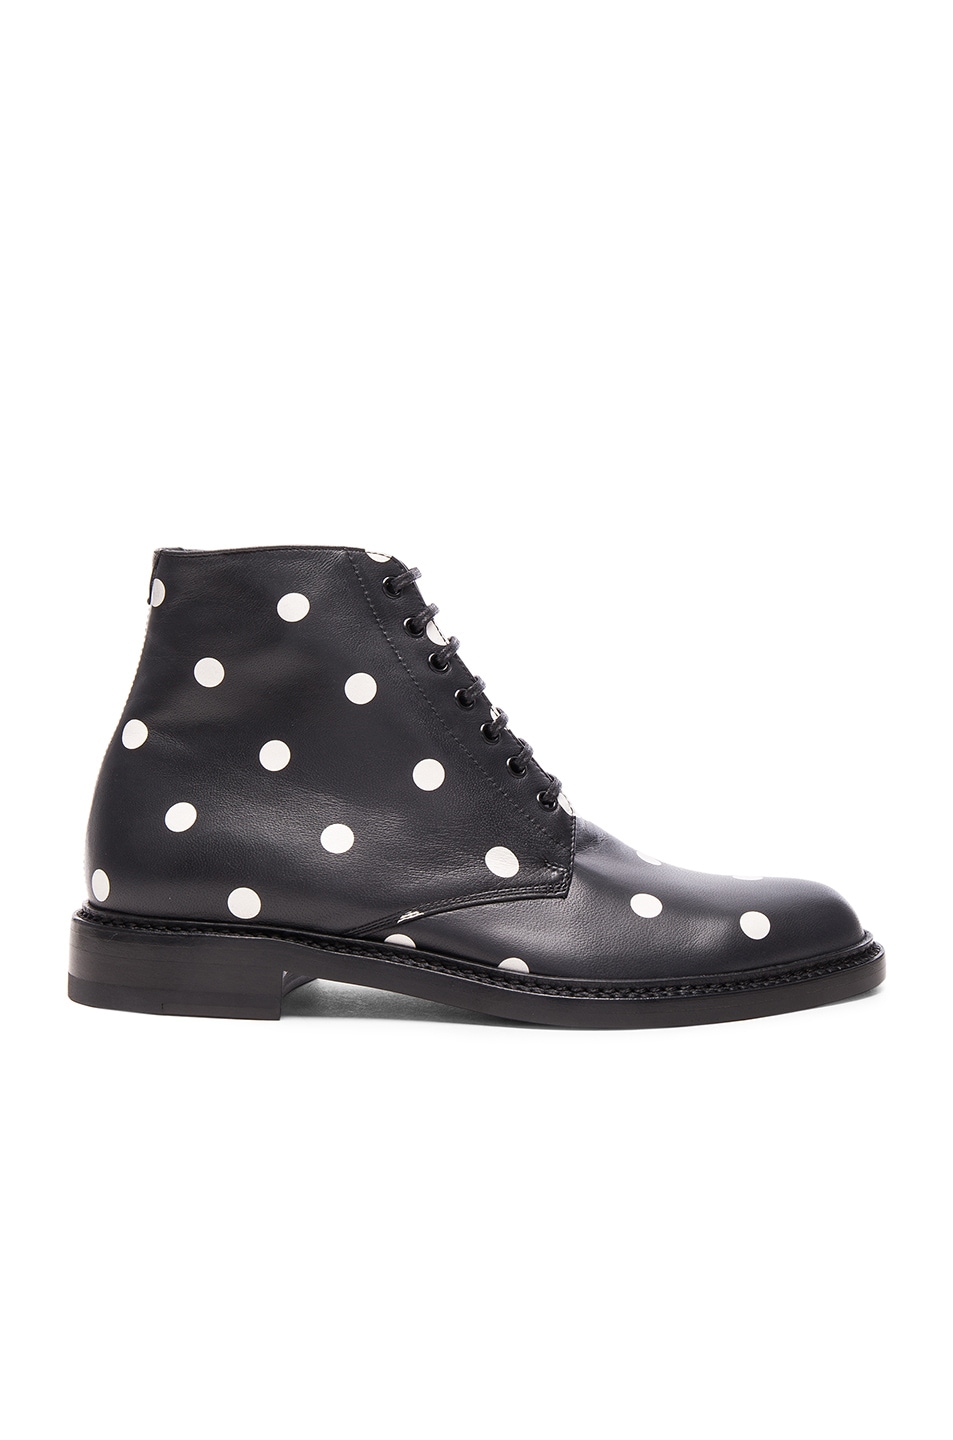 Image 1 of Saint Laurent Leather Polka Dots Lolita Boots in Black & White